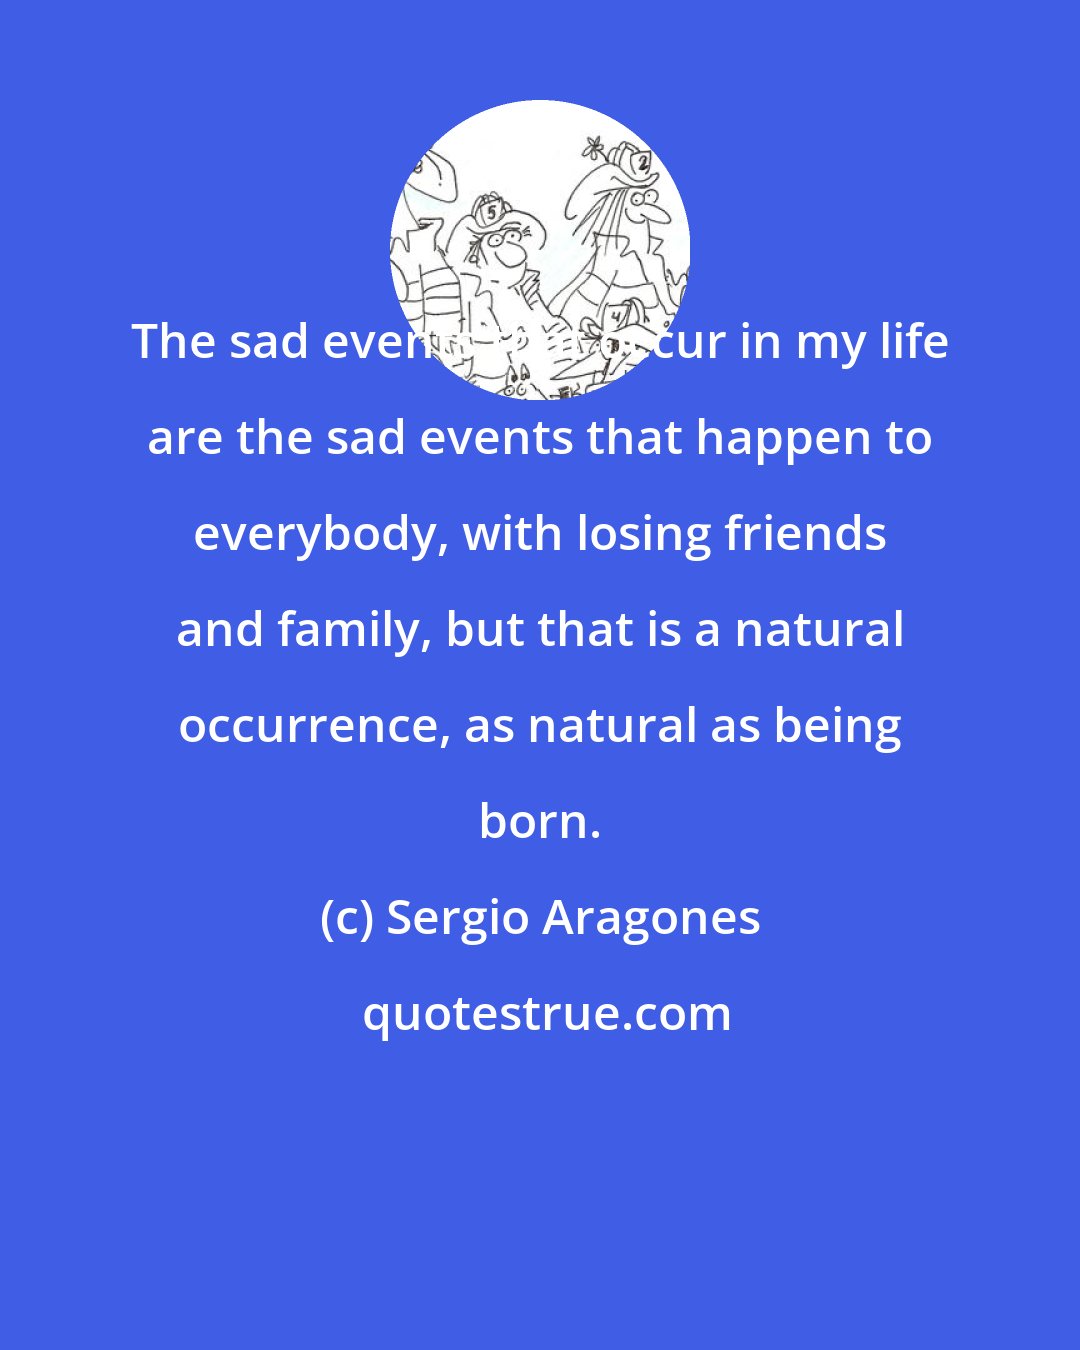 Sergio Aragones: The sad events that occur in my life are the sad events that happen to everybody, with losing friends and family, but that is a natural occurrence, as natural as being born.